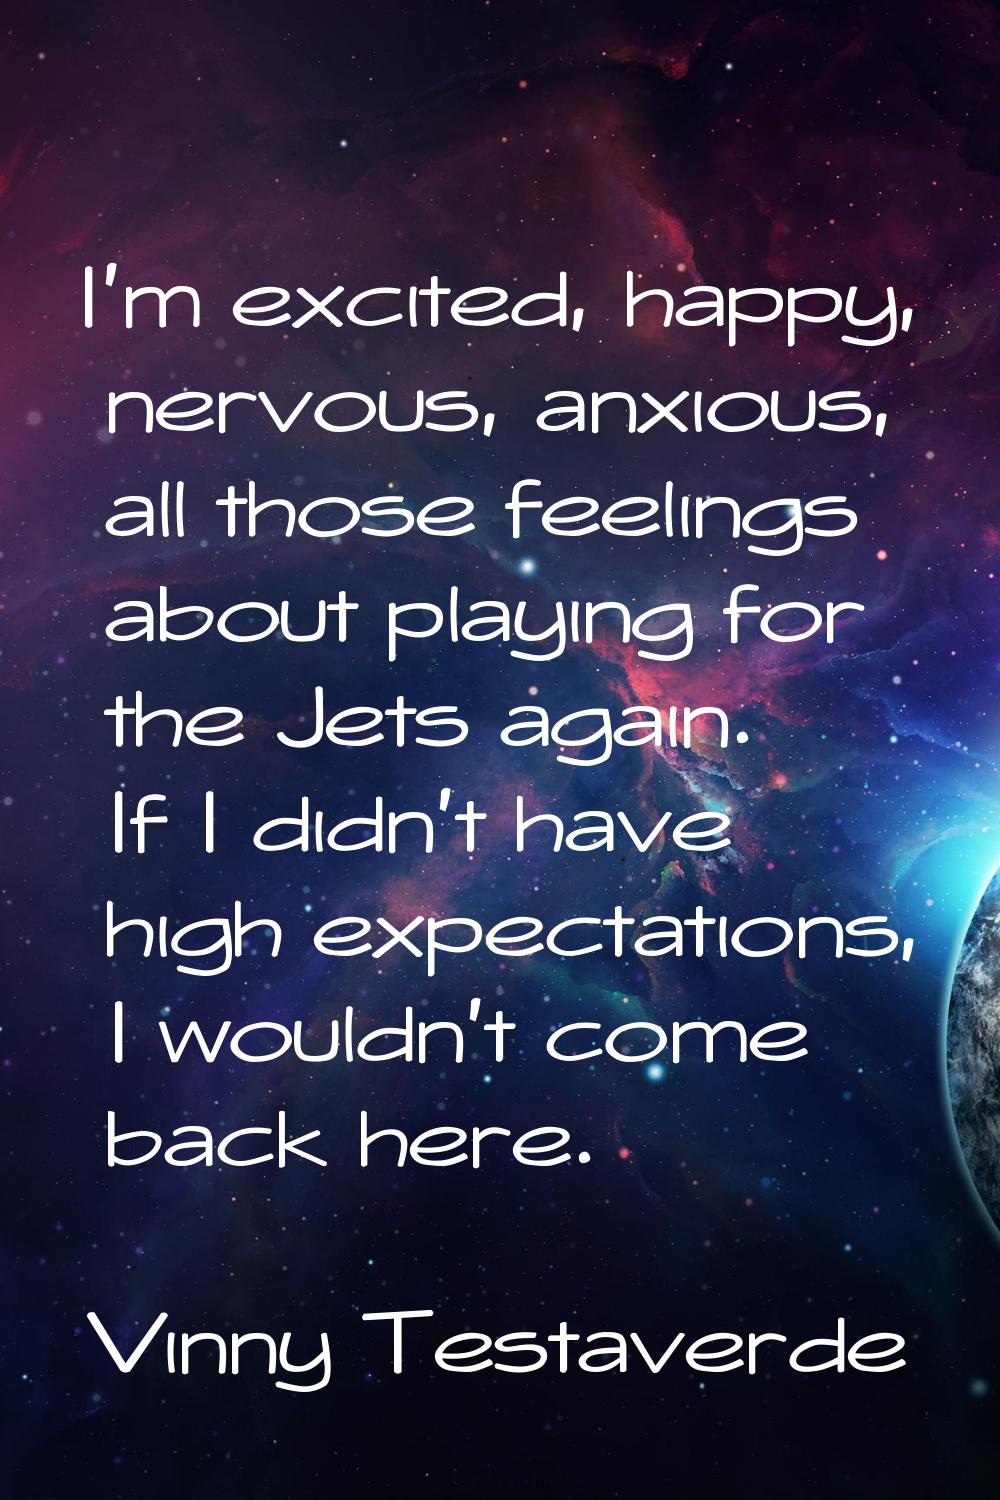 I'm excited, happy, nervous, anxious, all those feelings about playing for the Jets again. If I did